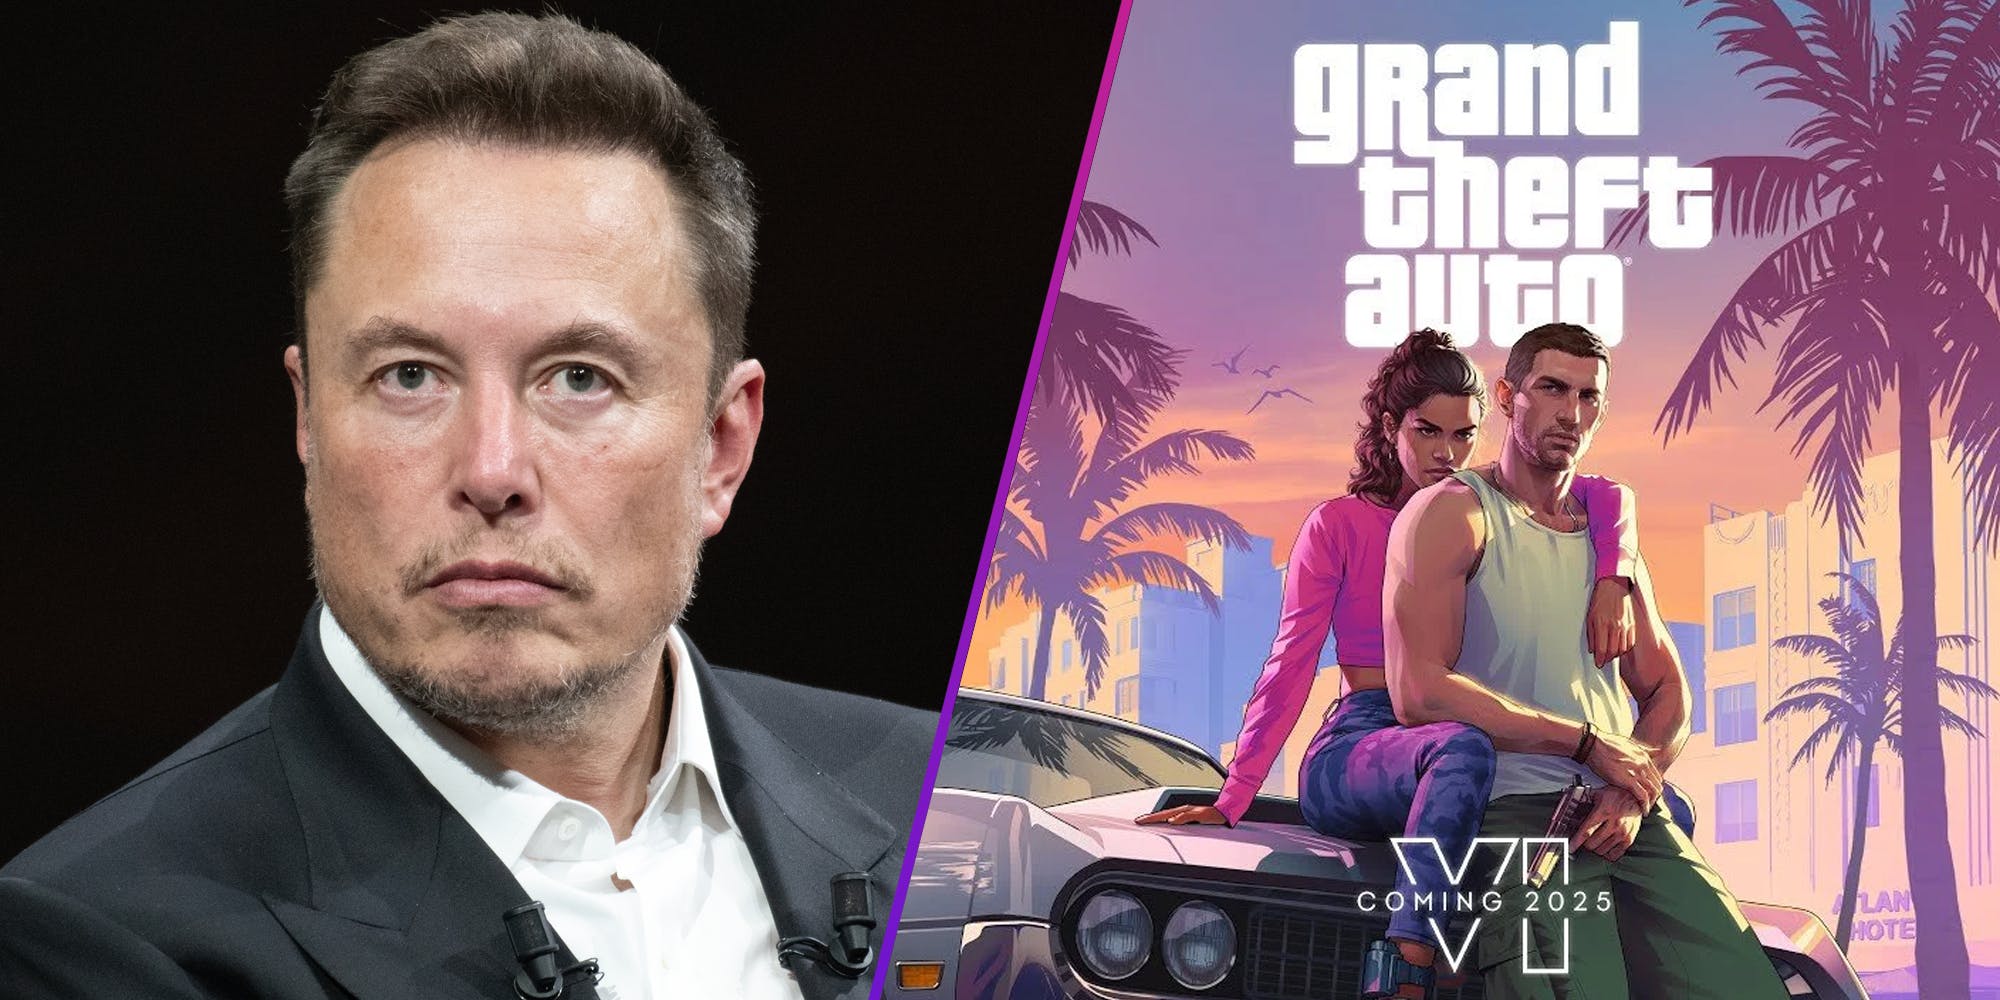 ‘I would expect this from Drake’: Even nerds are dunking on Elon Musk over ‘cornball’ reason for not playing Grand Theft Auto